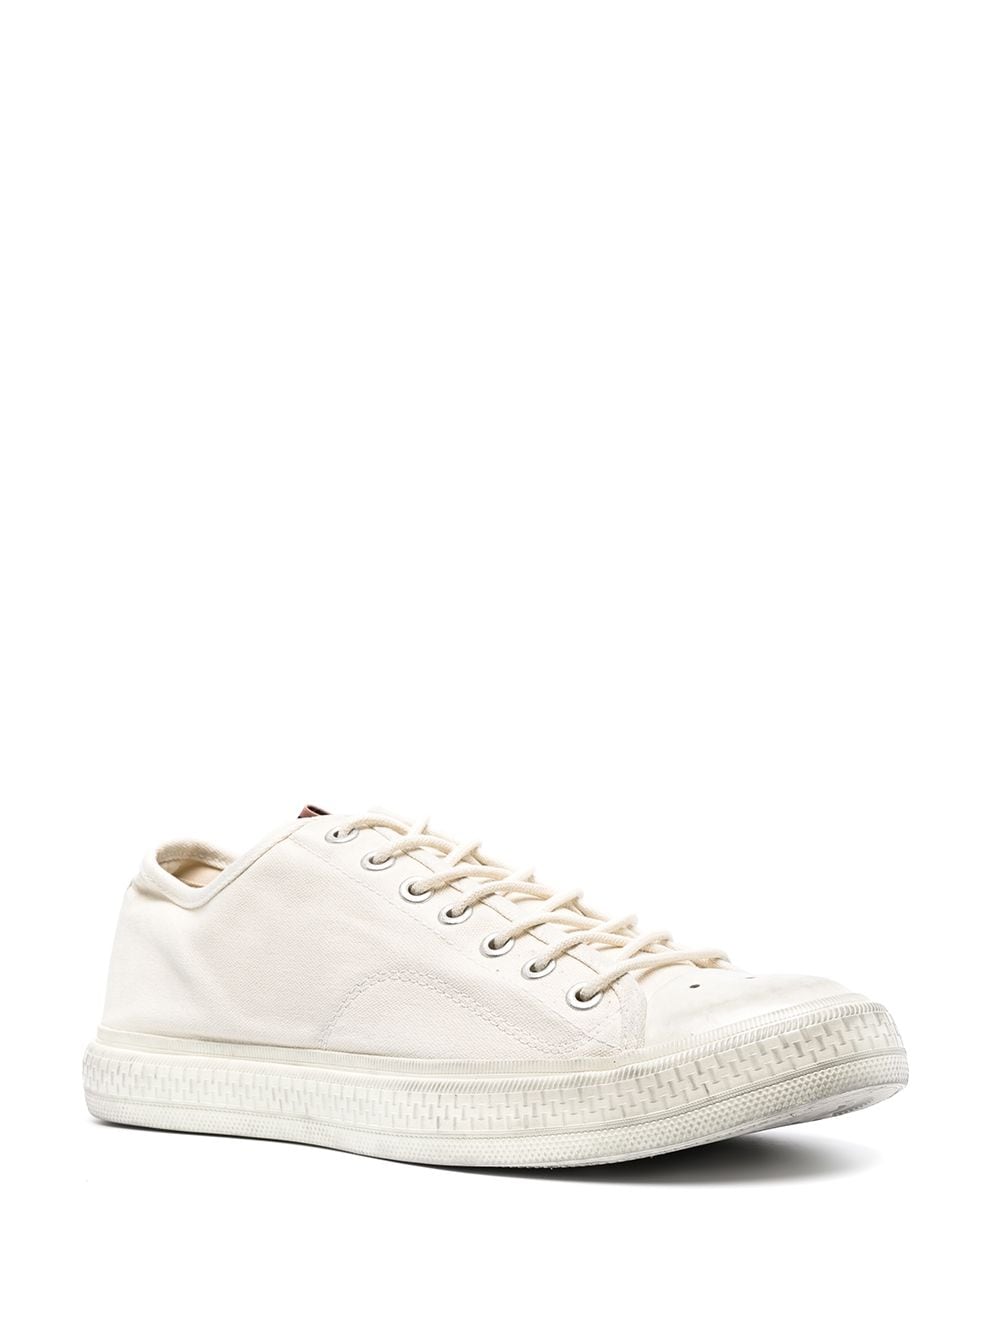 Acne Studios Distressed Organic Cotton-canvas Sneakers In Off-white ...